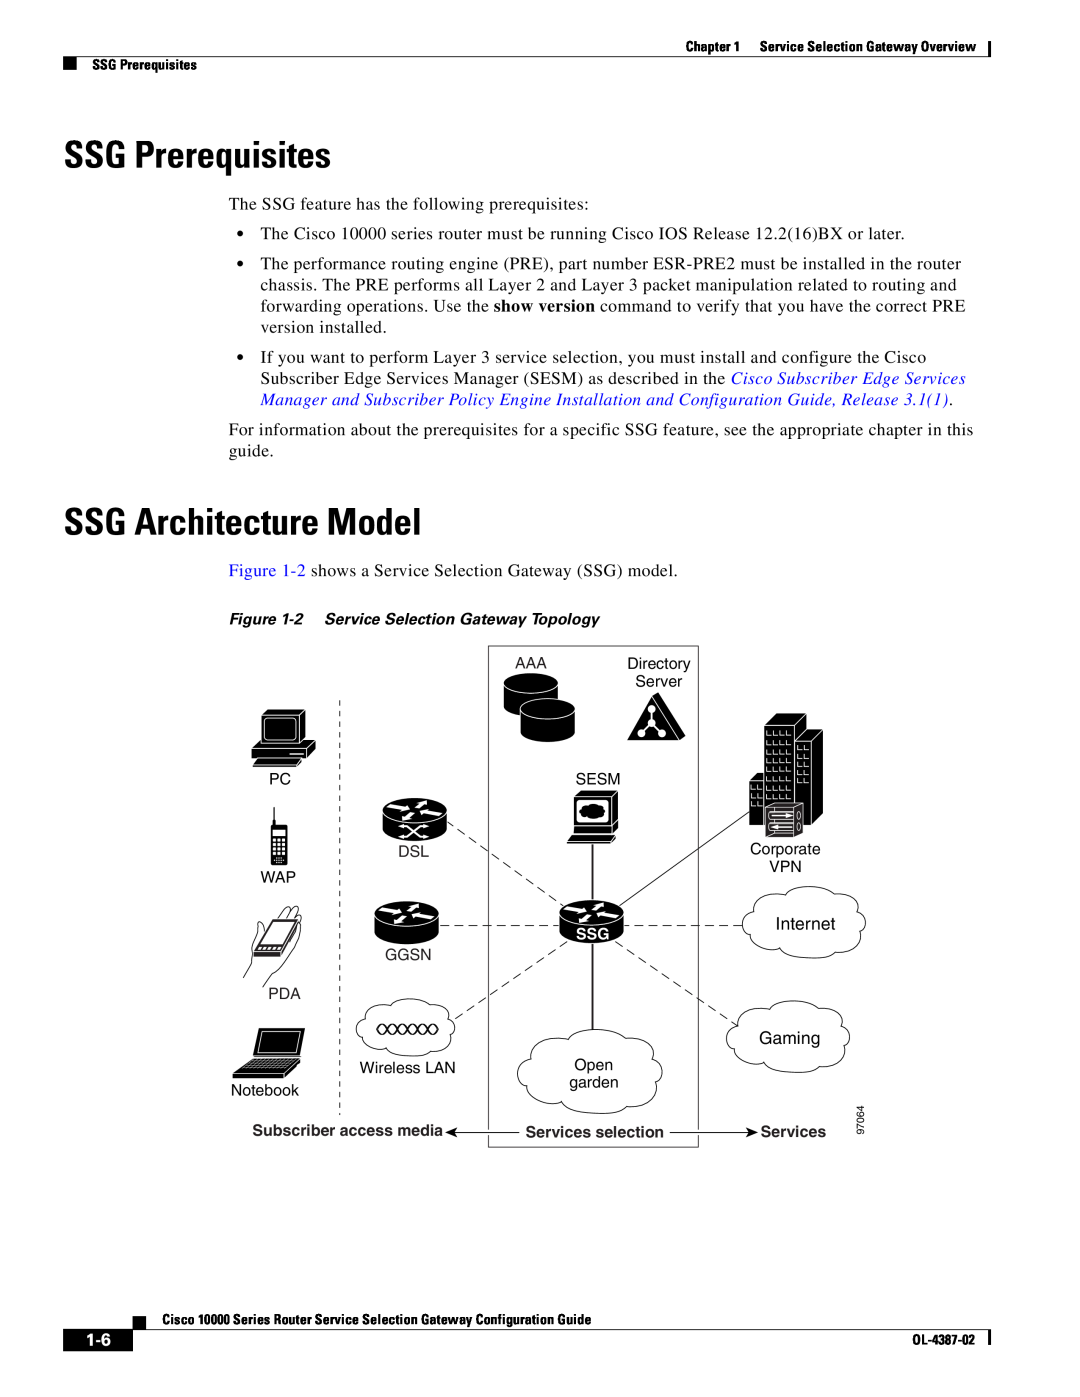 Cisco Systems OL-4387-02 manual SSG Prerequisites, SSG Architecture Model, Internet, Gaming 